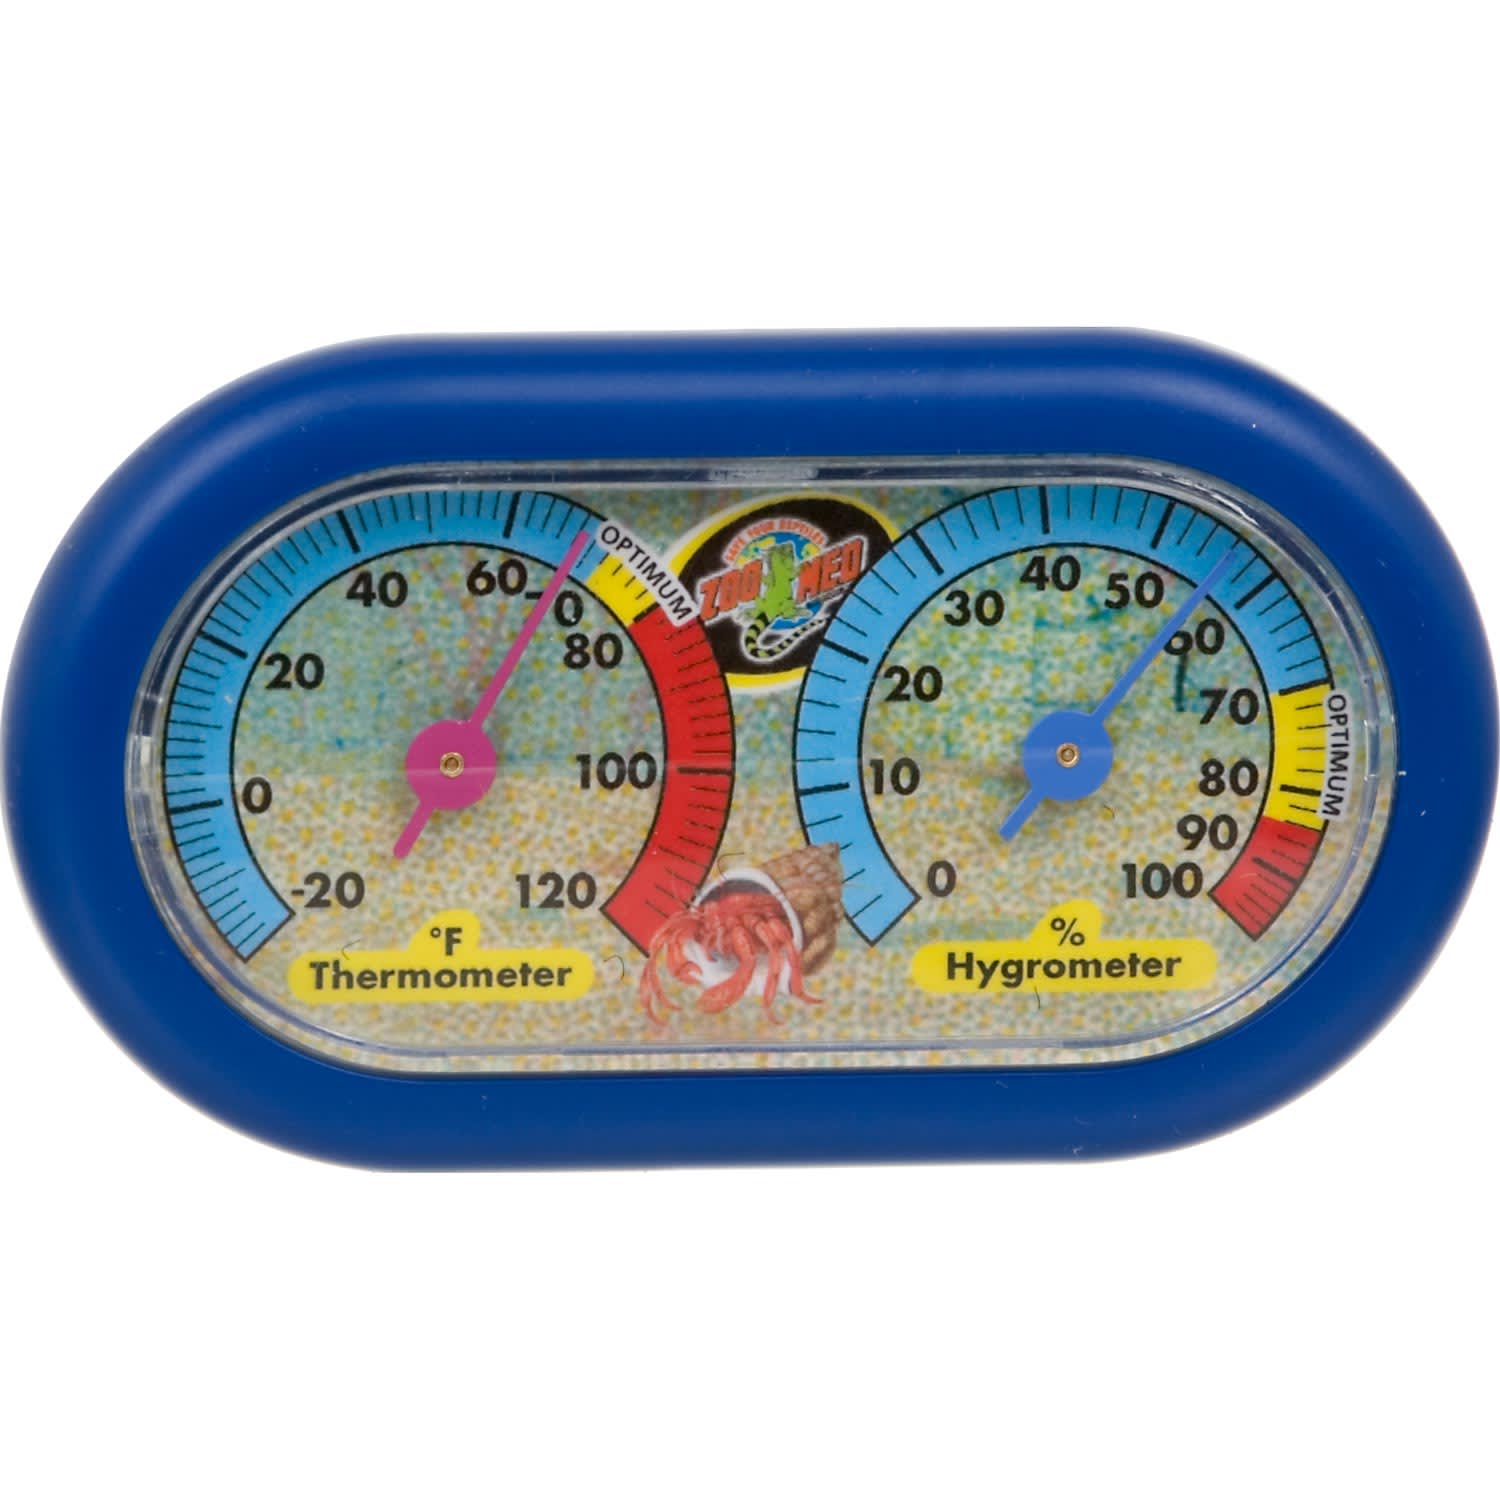 Thermometers for my Reptile EnclosureWild Life Hub